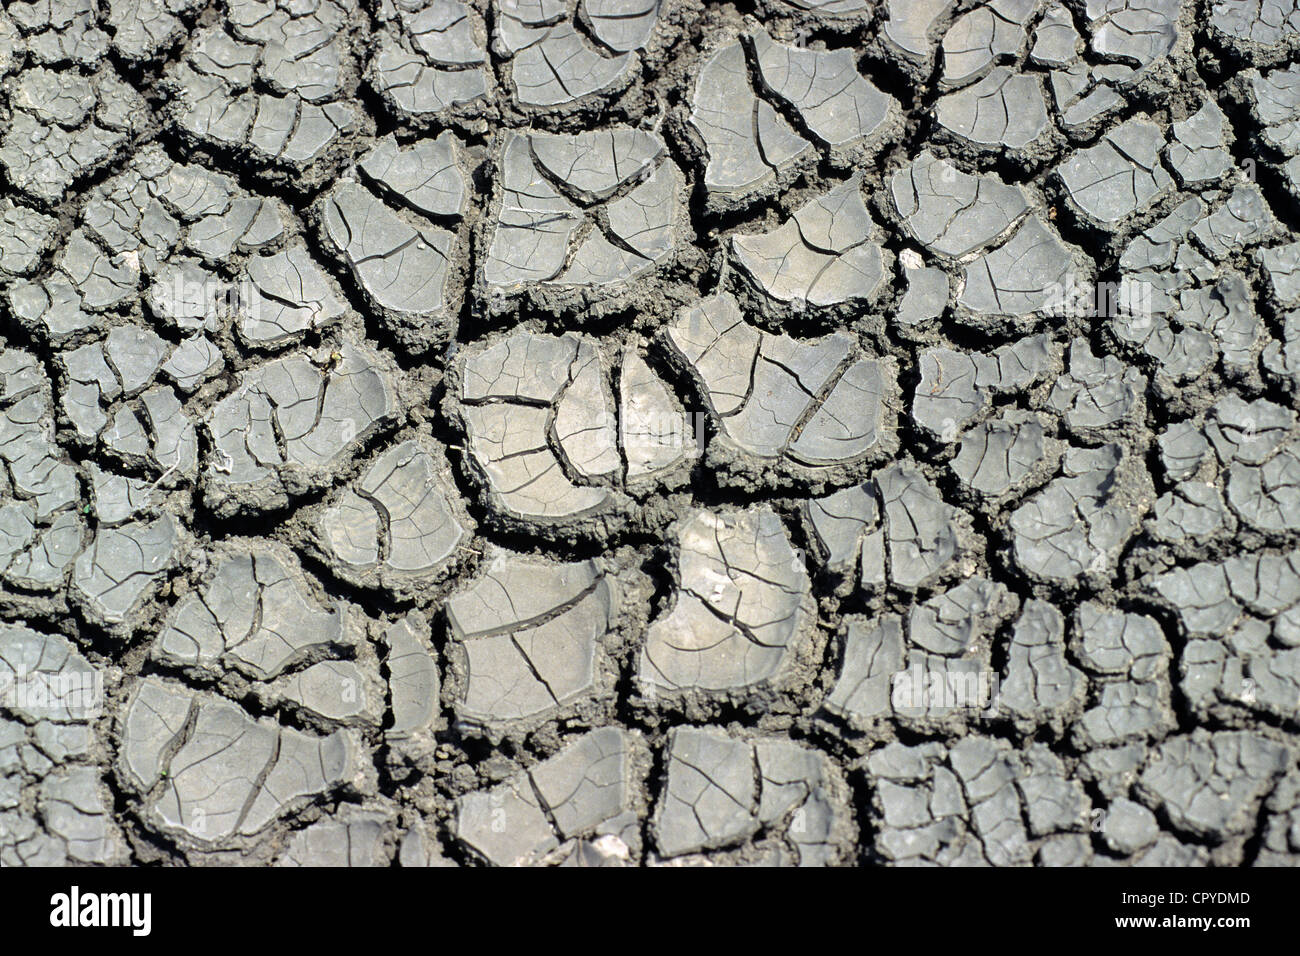 Spain, Andalusia, Jerez, crackled ground due to the dry ness Stock Photo